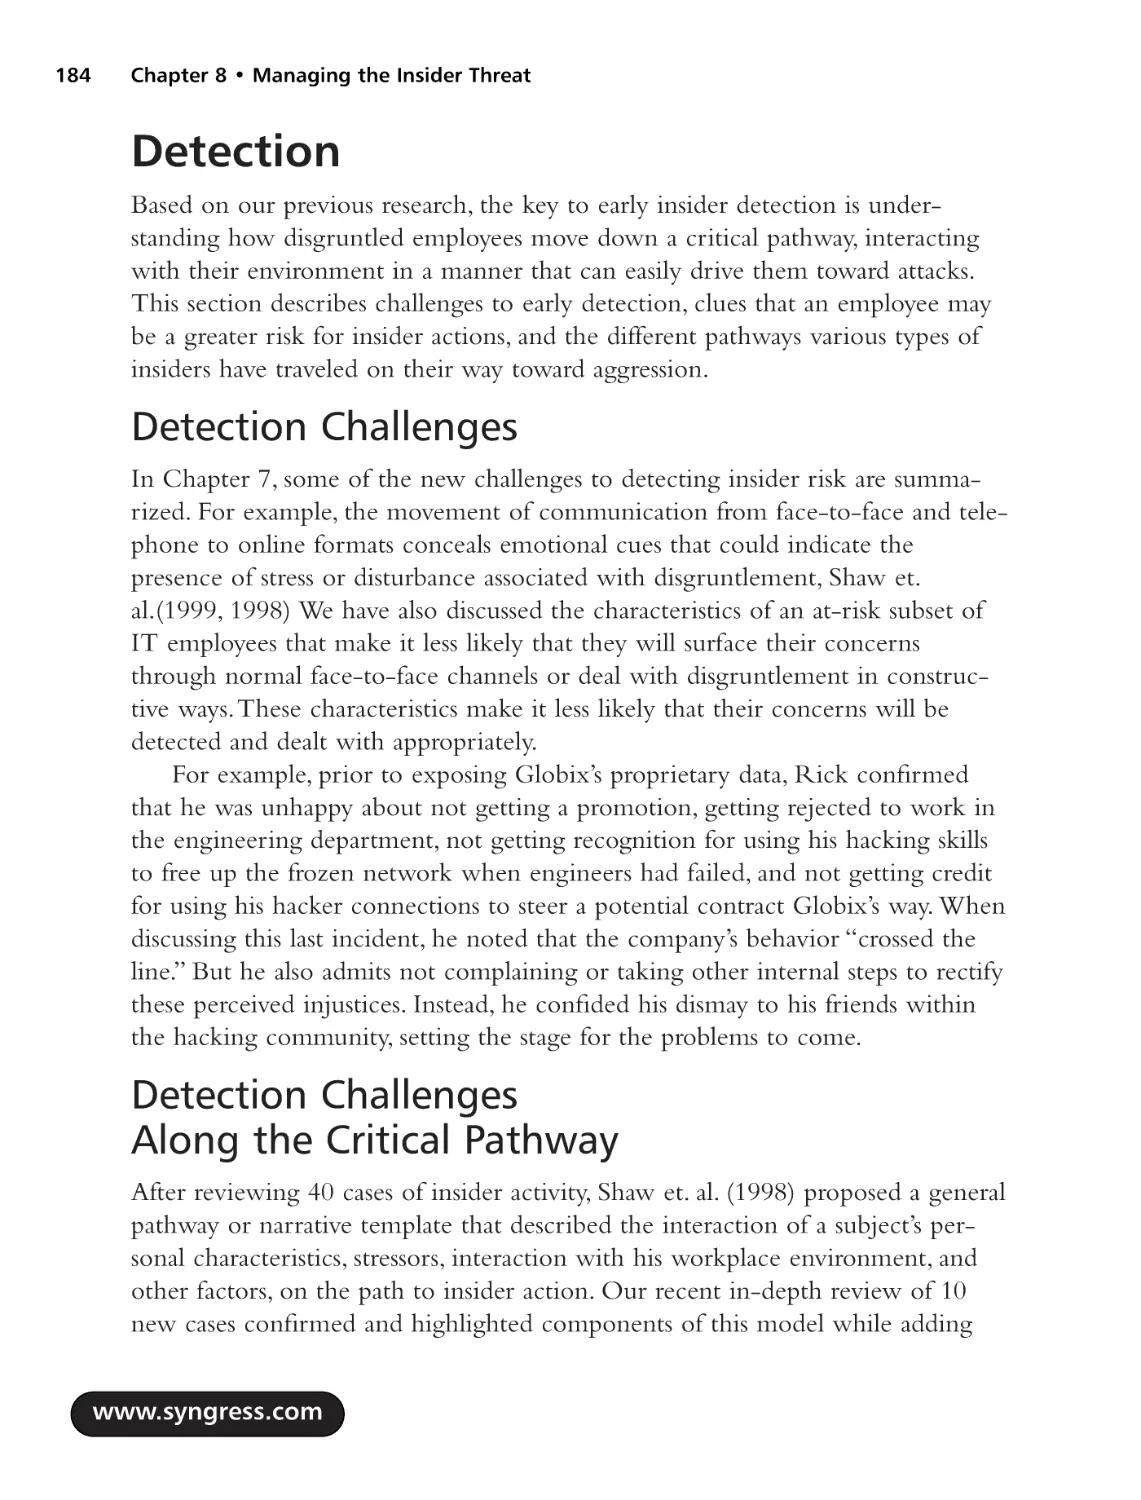 Detection
Detection Challenges
Detection Challenges Along the Critical Pathway